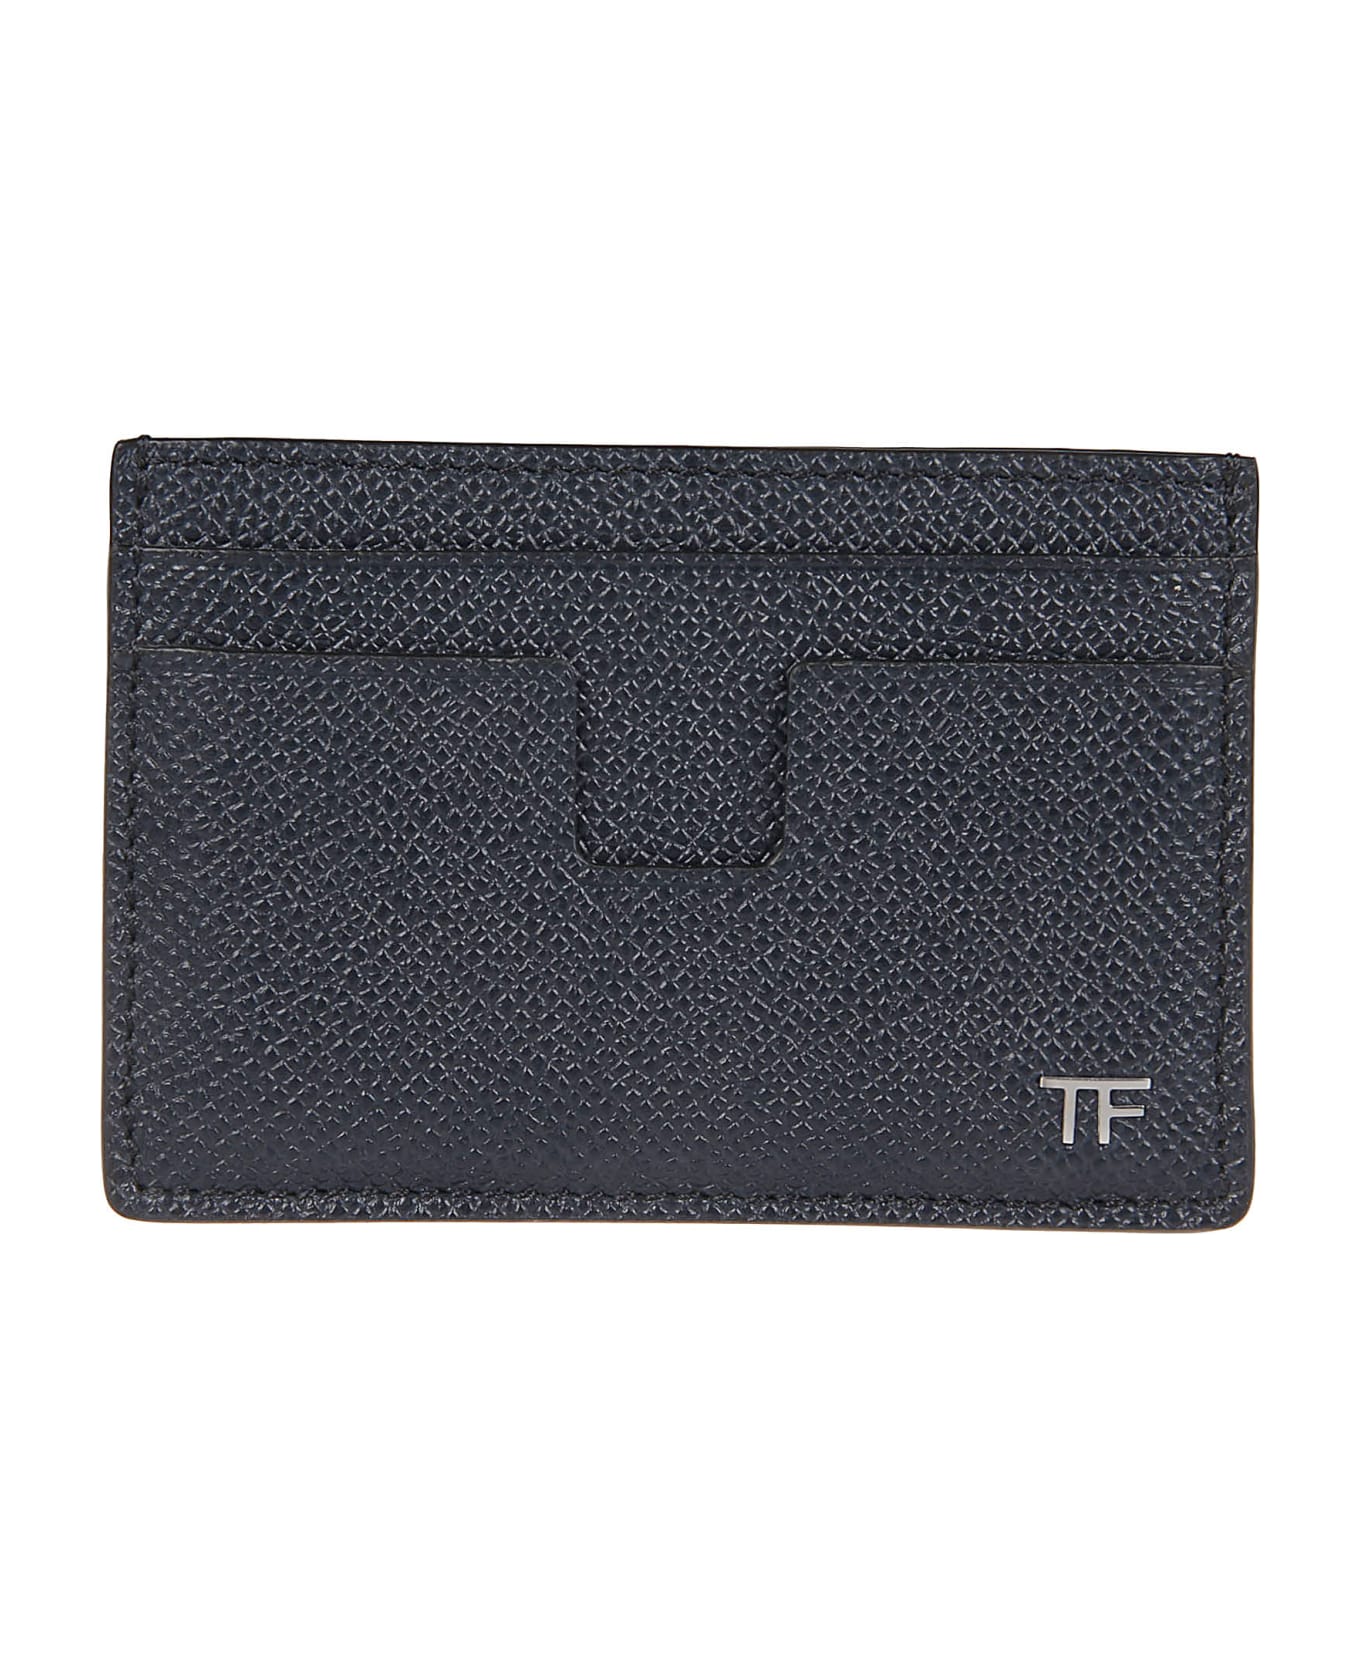 Tom Ford Logo Plaque Classic Credit Card Holder - Midnight Blue